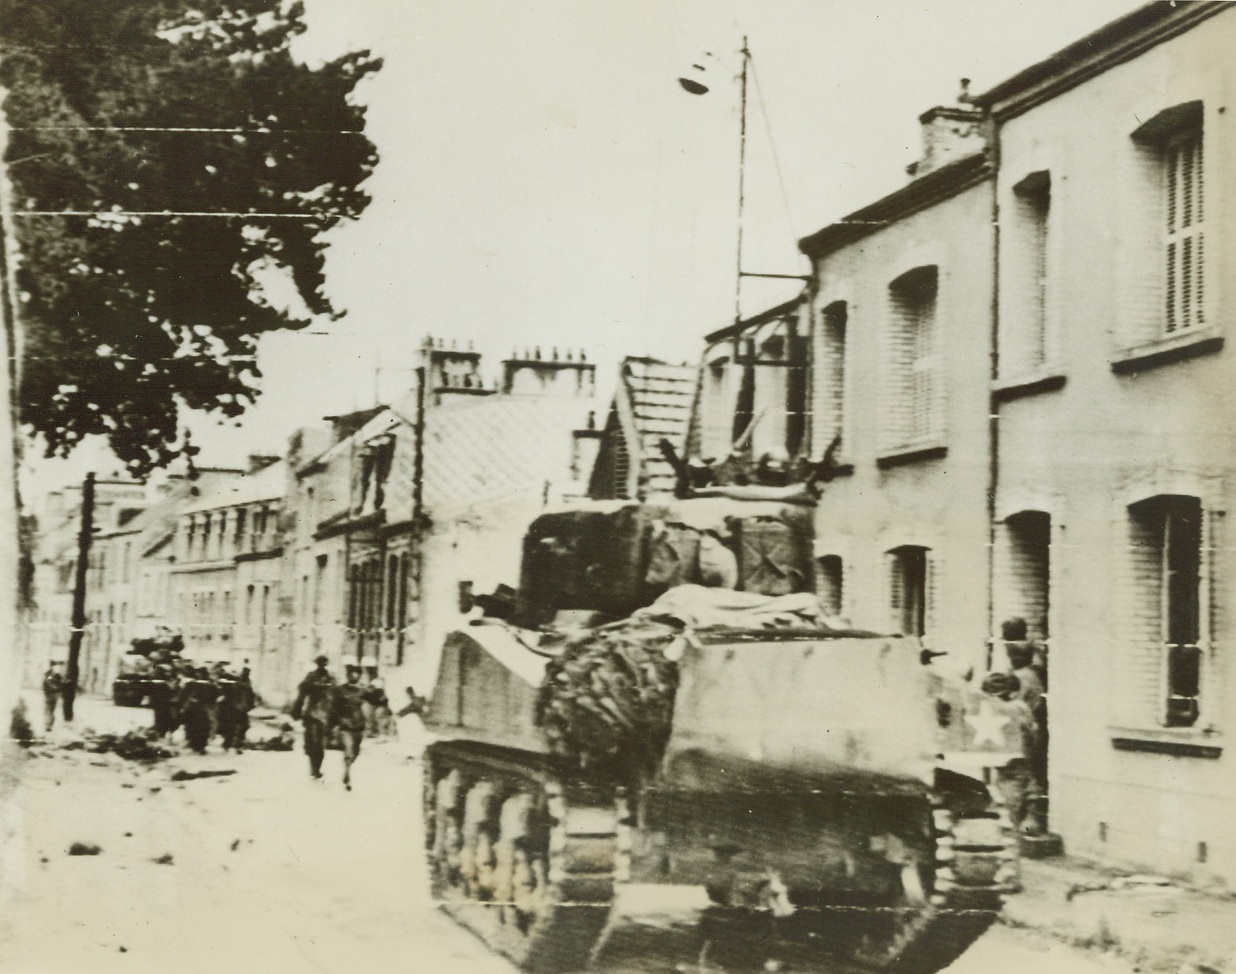 Yanks Make Tank Tracks In Cherbourg, 6/27/1944. Cherbourg, France – While Yank soldiers seek shelter in doorways from German snipers, American tanks move through the streets of Cherbourg immediately before the fall of the port city was officially announced. Now that American forces are in possession of Cherbourg, the Allies have at their disposal an adequate port for the landing of reinforcements and supplies. Credit: Army Radiotelephoto from ACME;